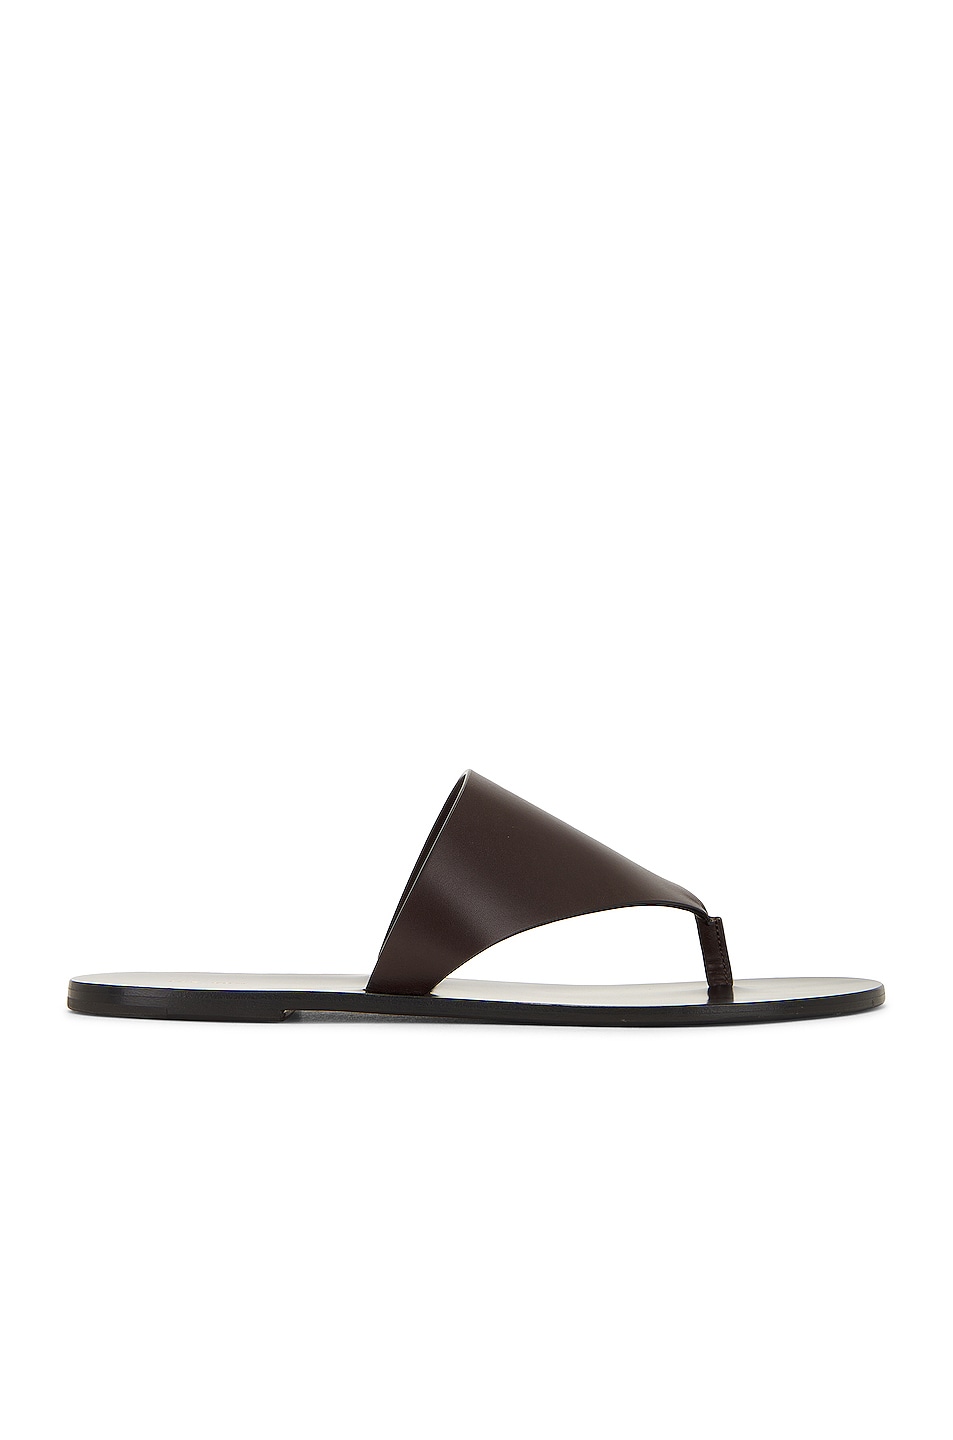 Image 1 of The Row Avery Thong Sandal in Espresso